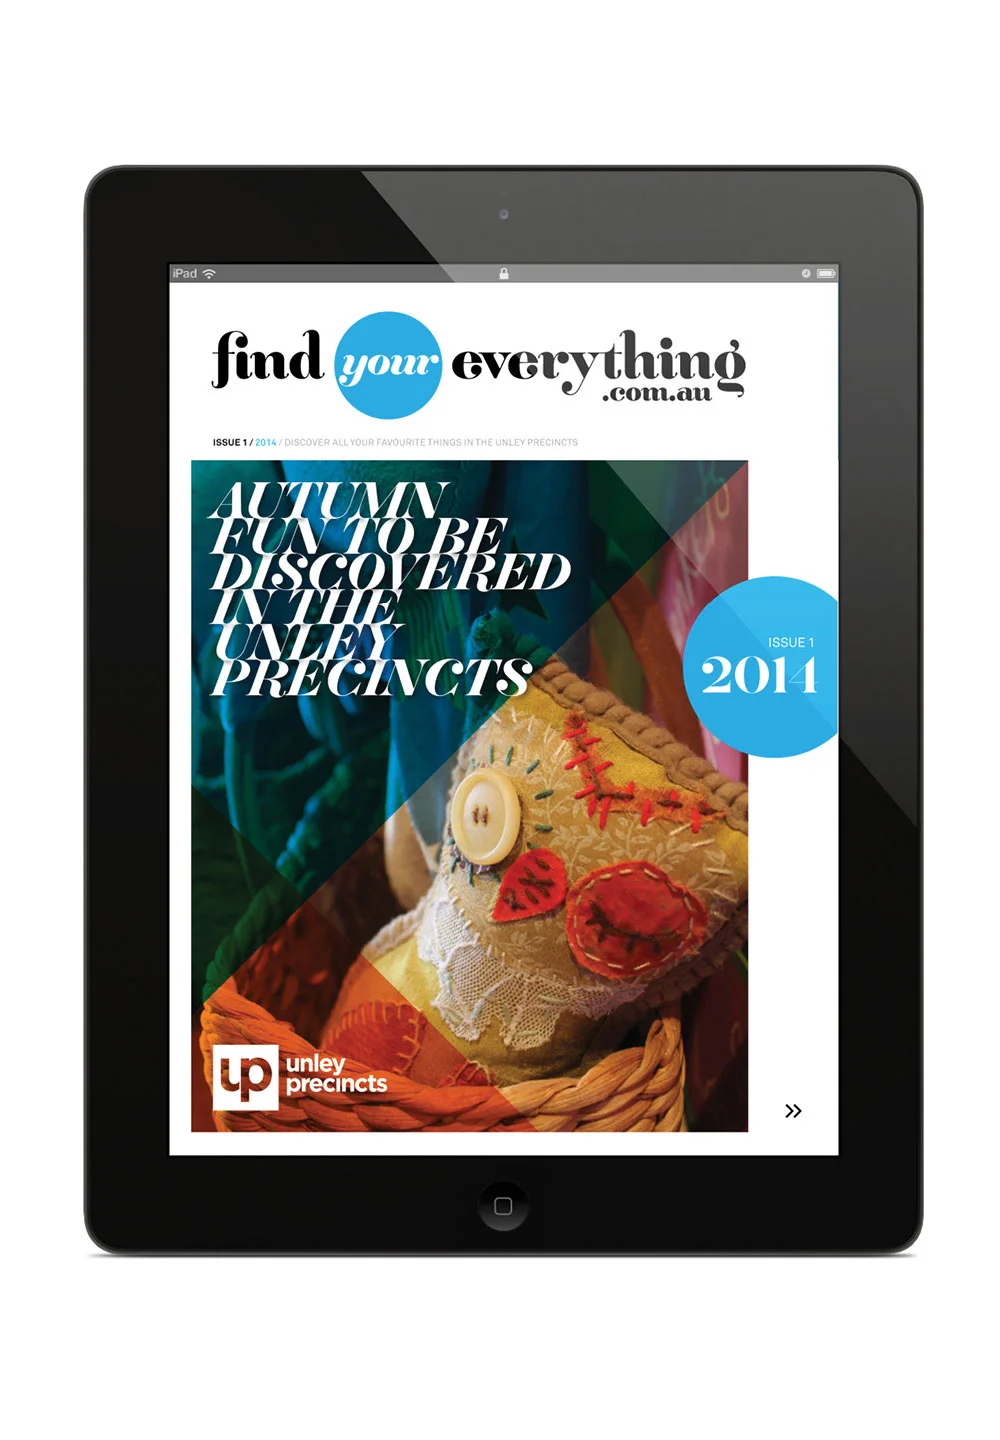 Find Your Everything - Digital Publication